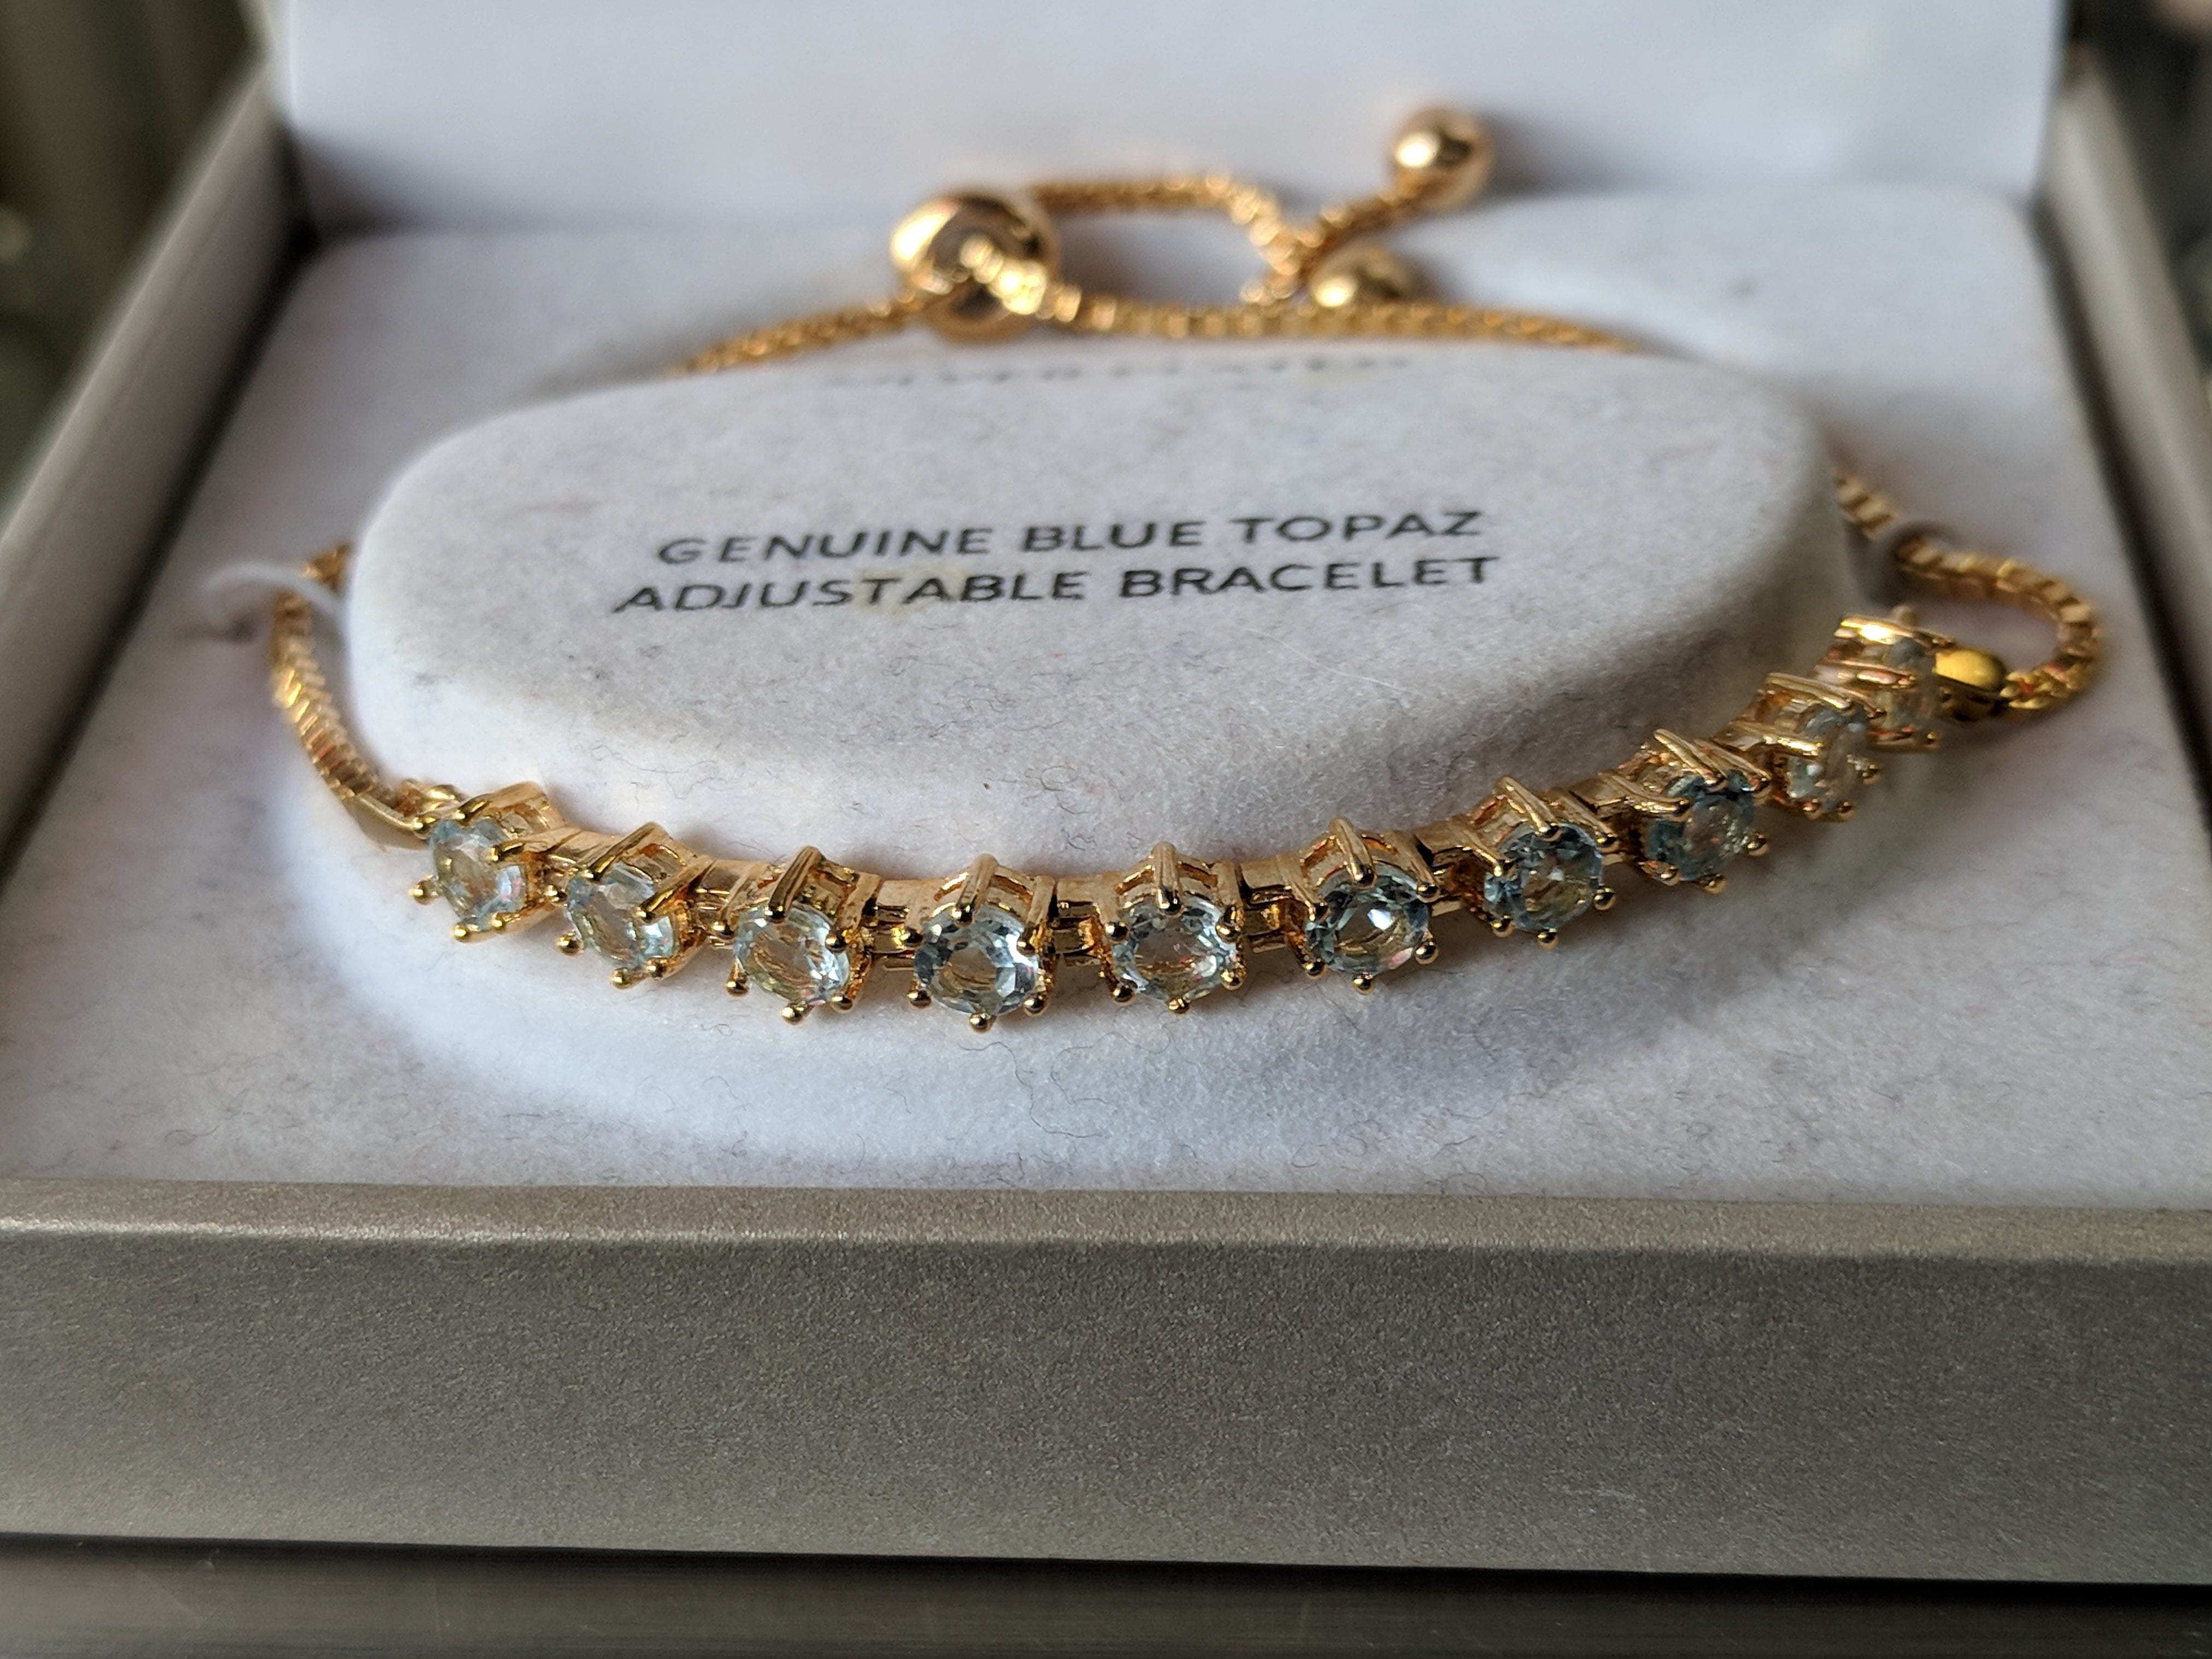 Victoria Townsend Blue Topaz Slider Bracelet 3ctw, Gold Plated 60% OFF Retail - The Pink Pigs, A Compassionate Boutique